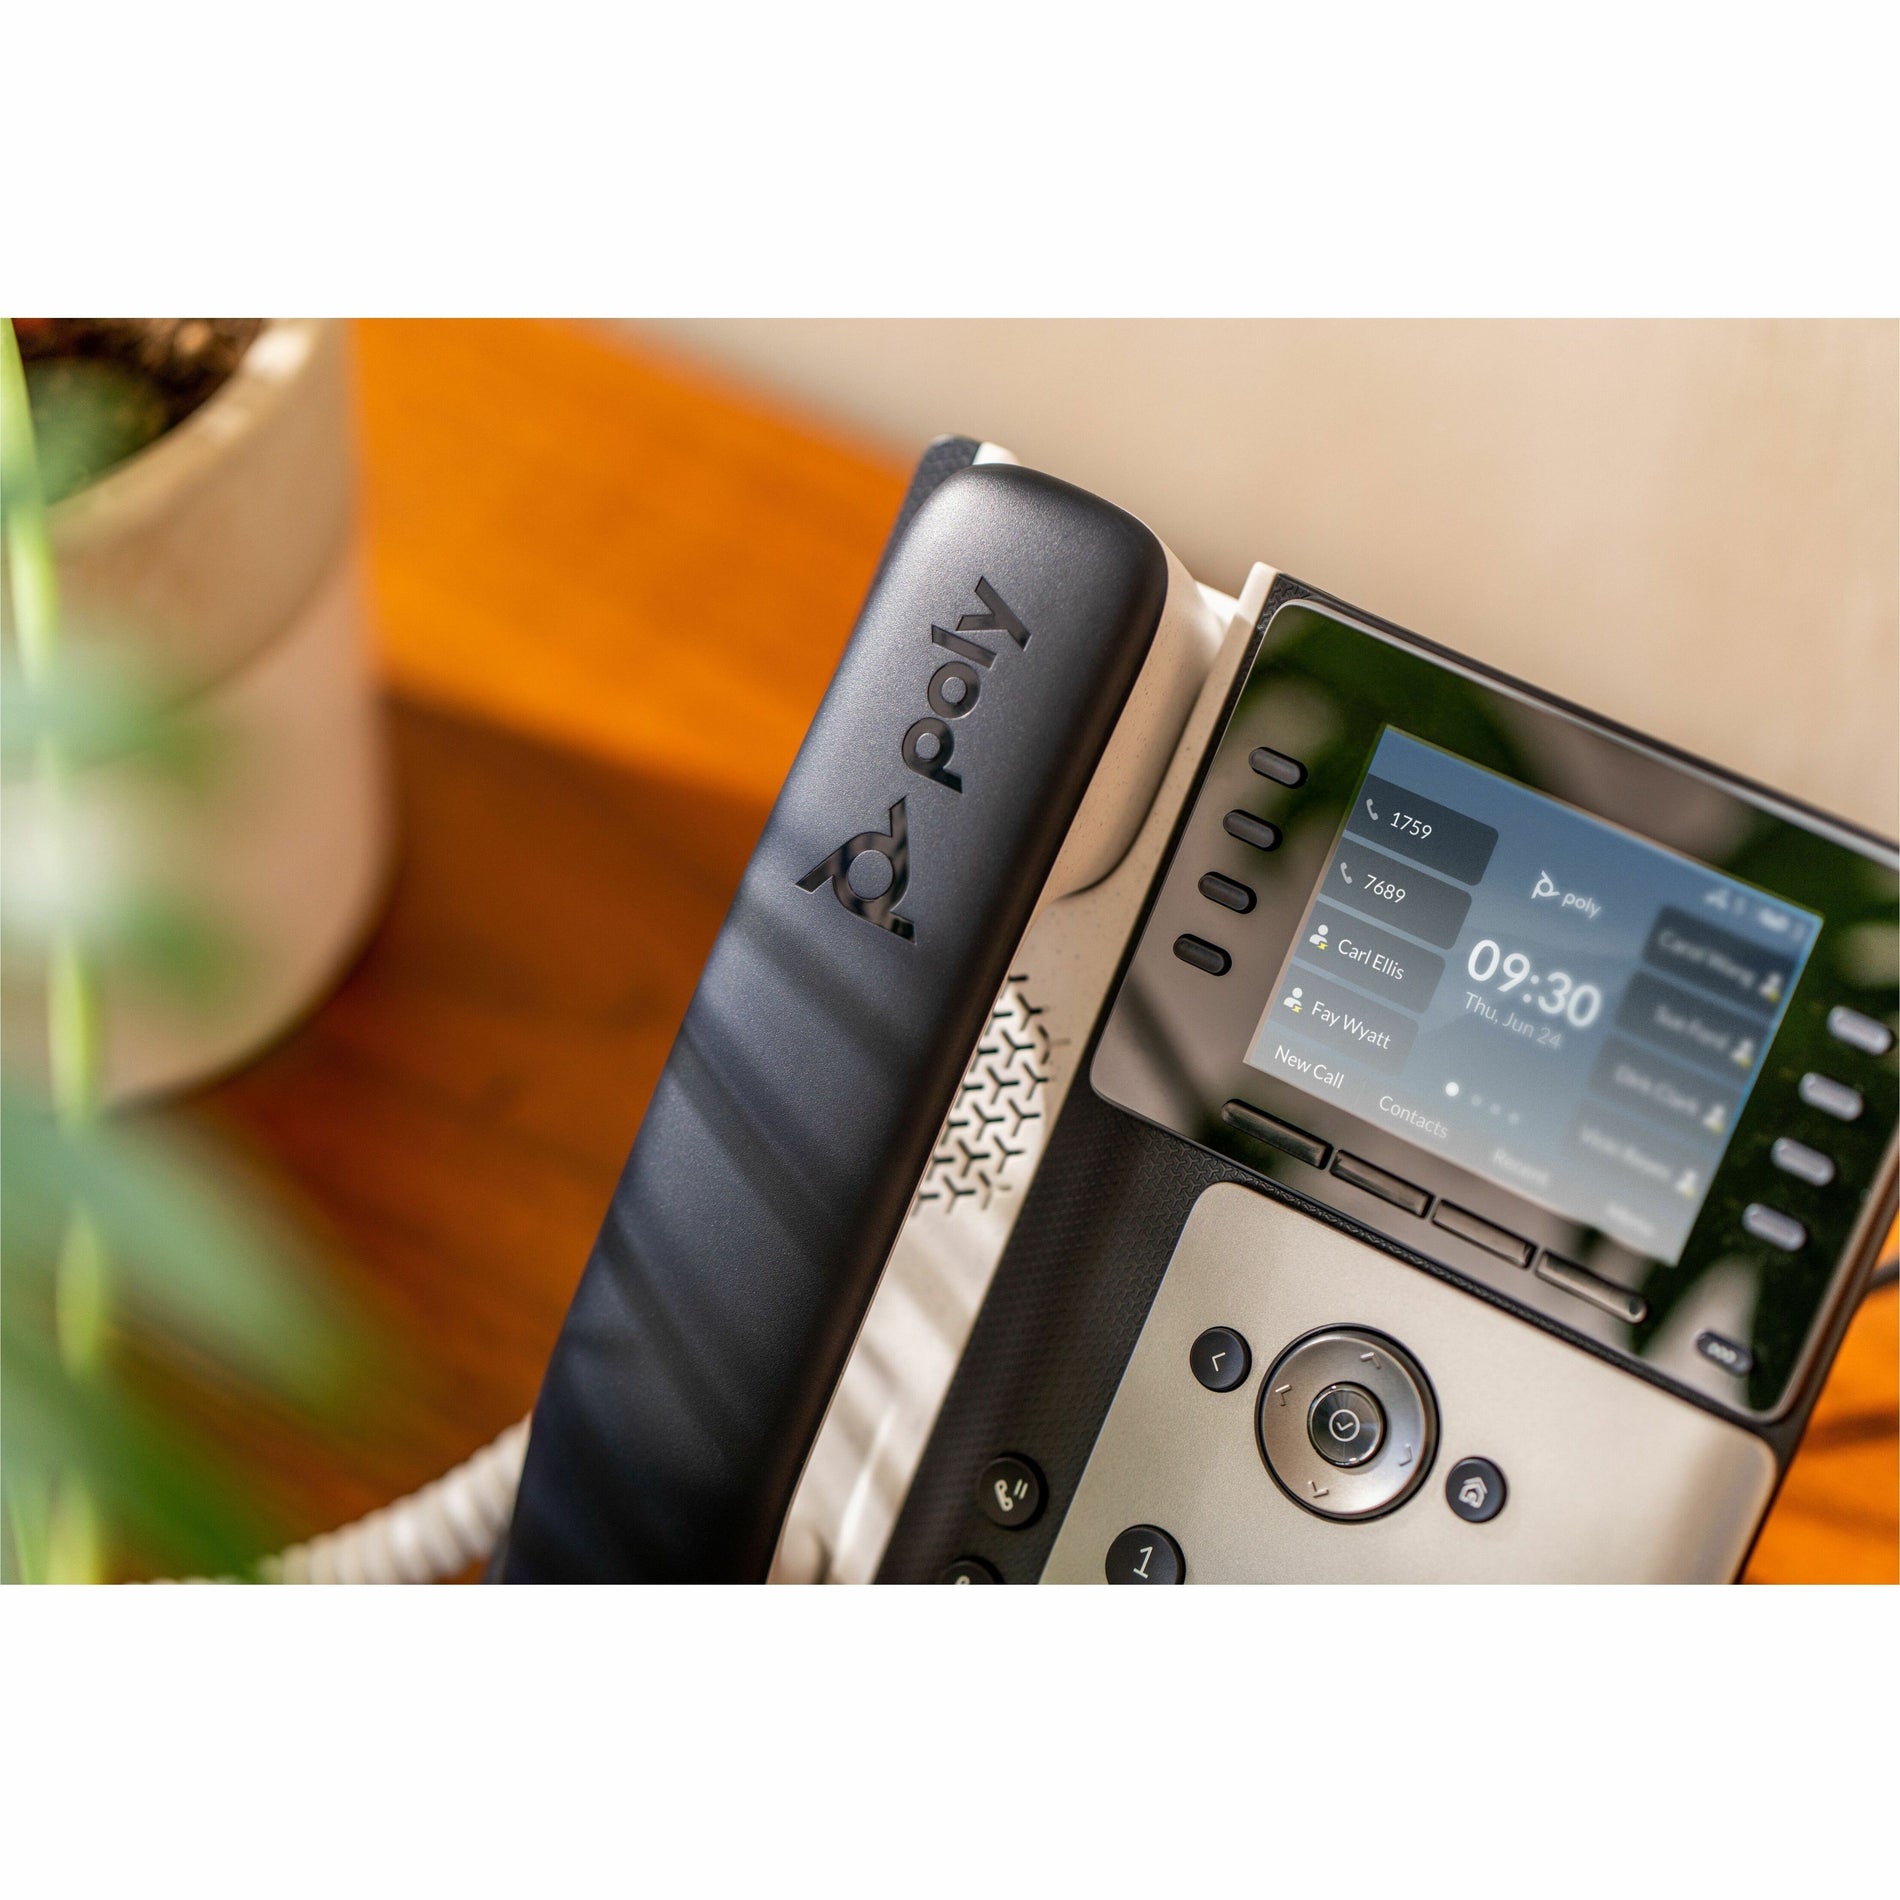 Poly Edge E350 IP Phone and PoE-enabled with Power Supply, Corded/Cordless, Wi-Fi, Bluetooth, Desktop, Wall Mountable, Black